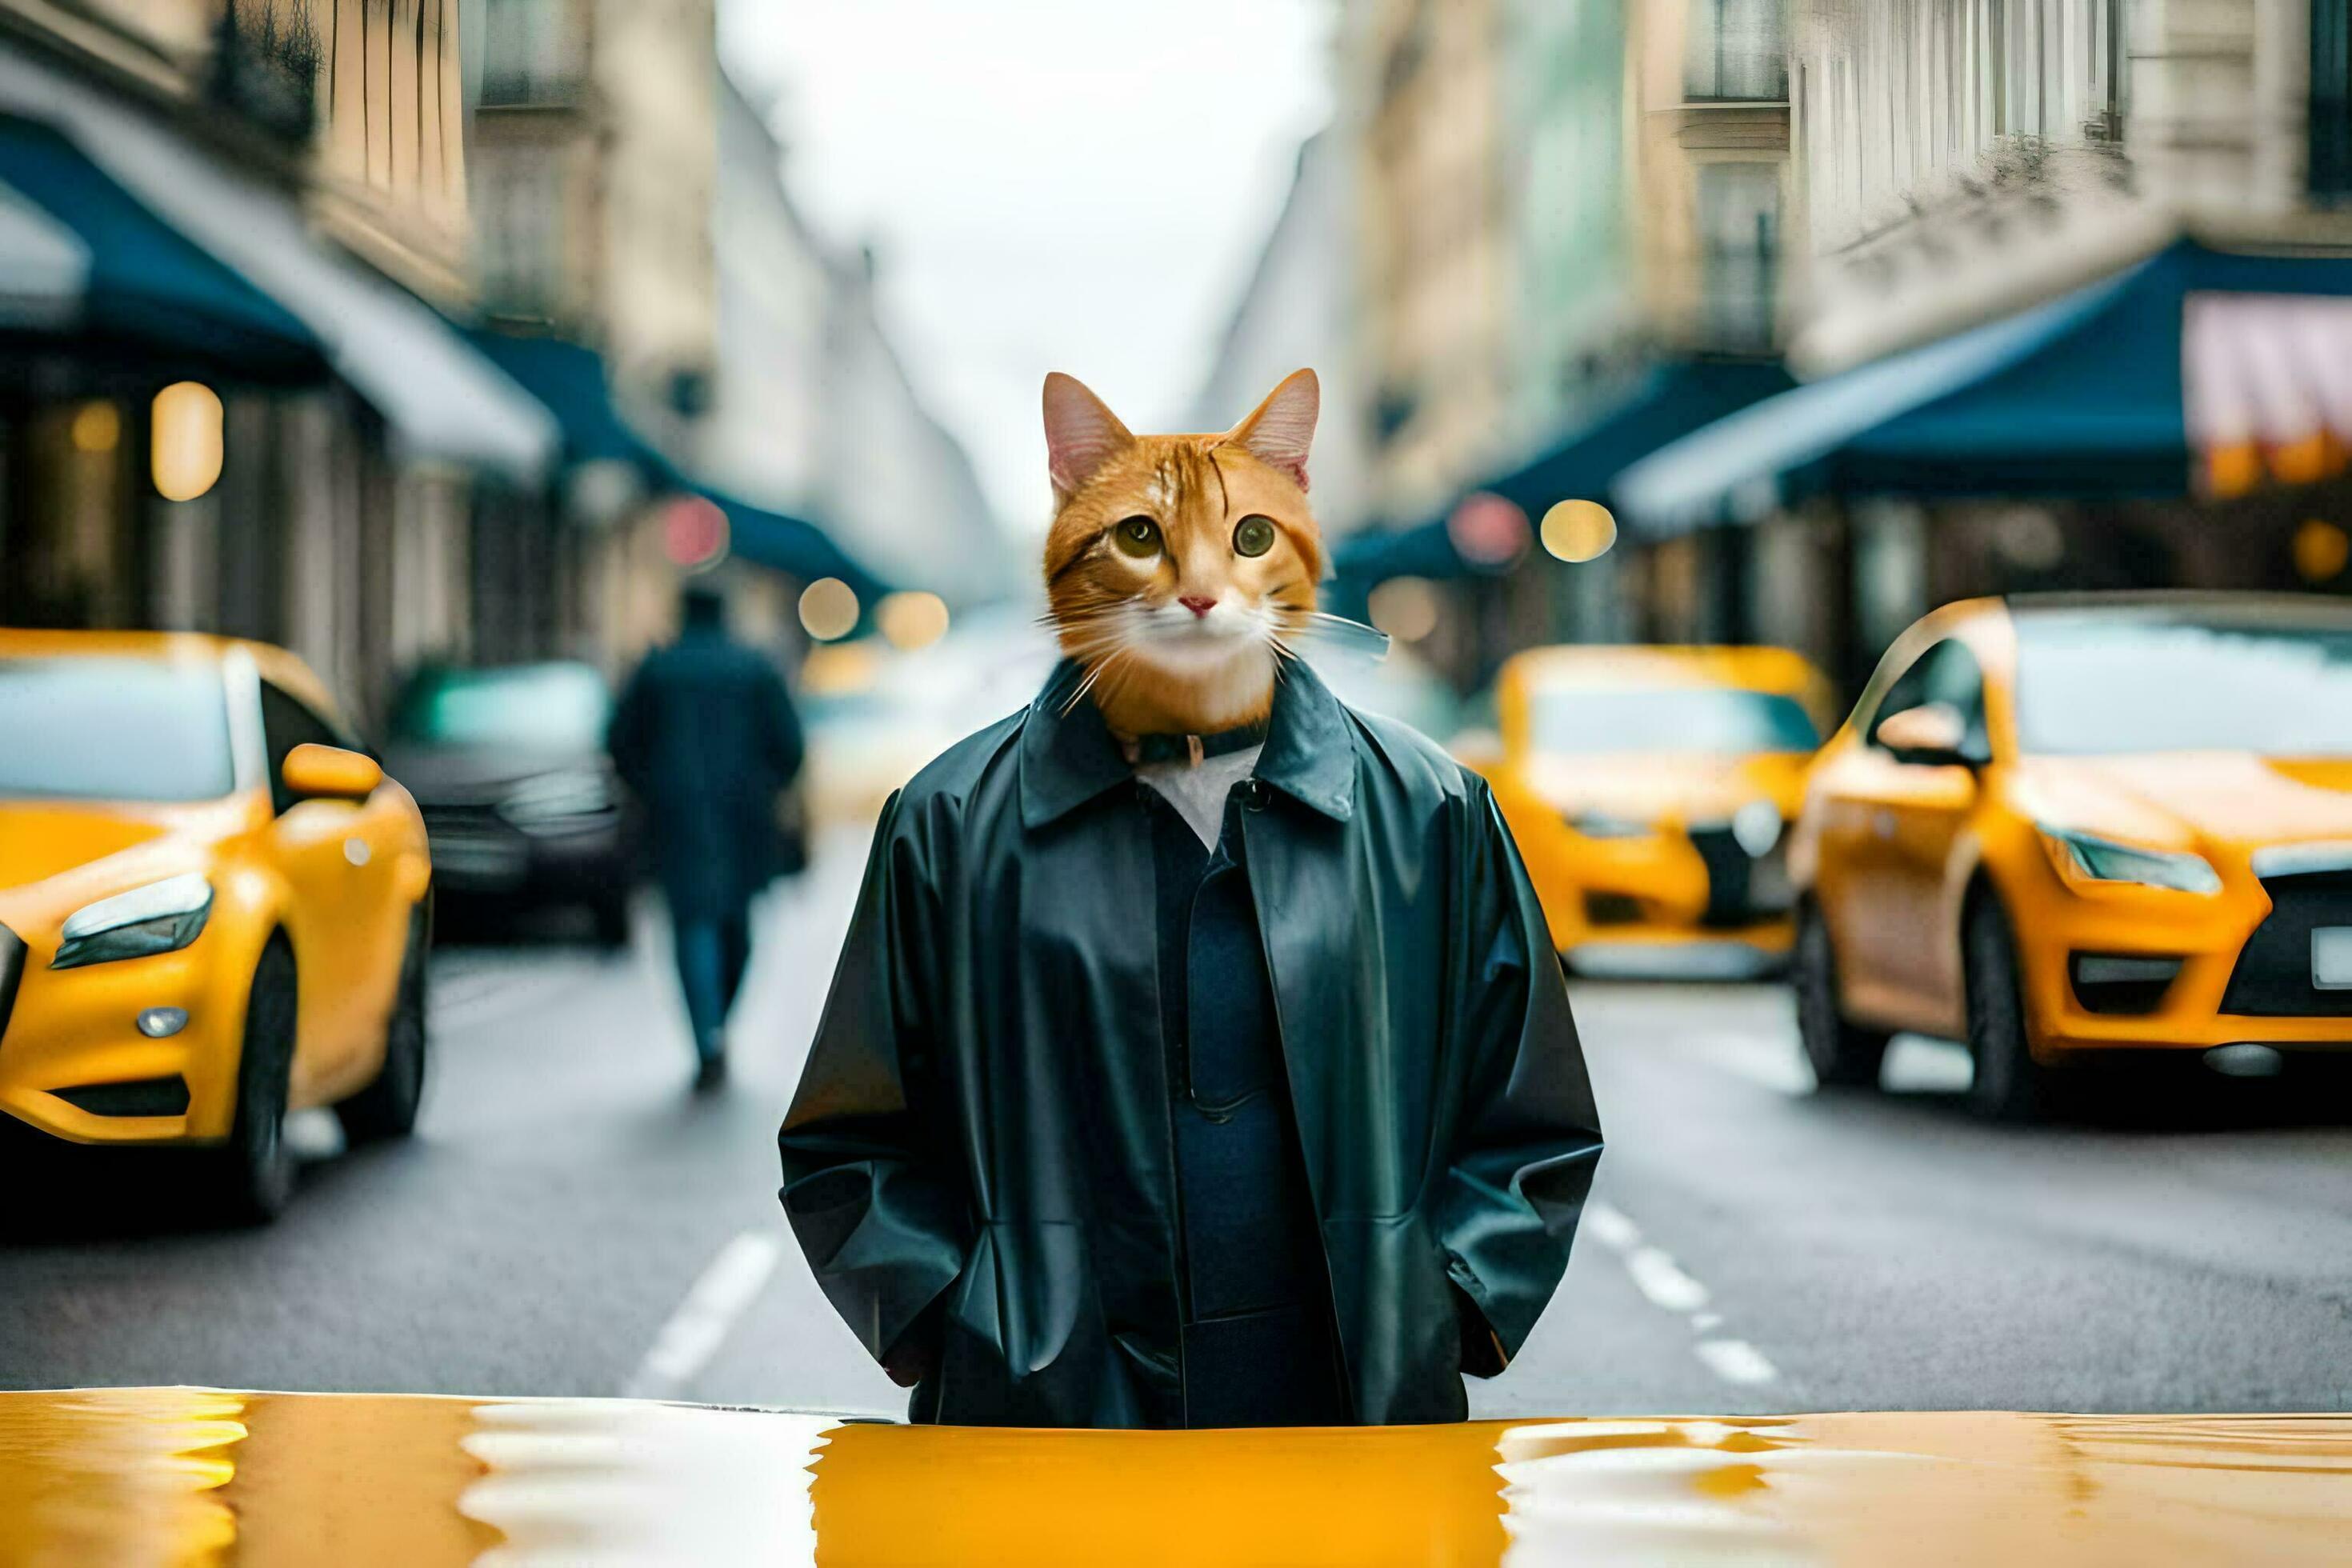 a cat wearing a coat and standing in the middle of a city street